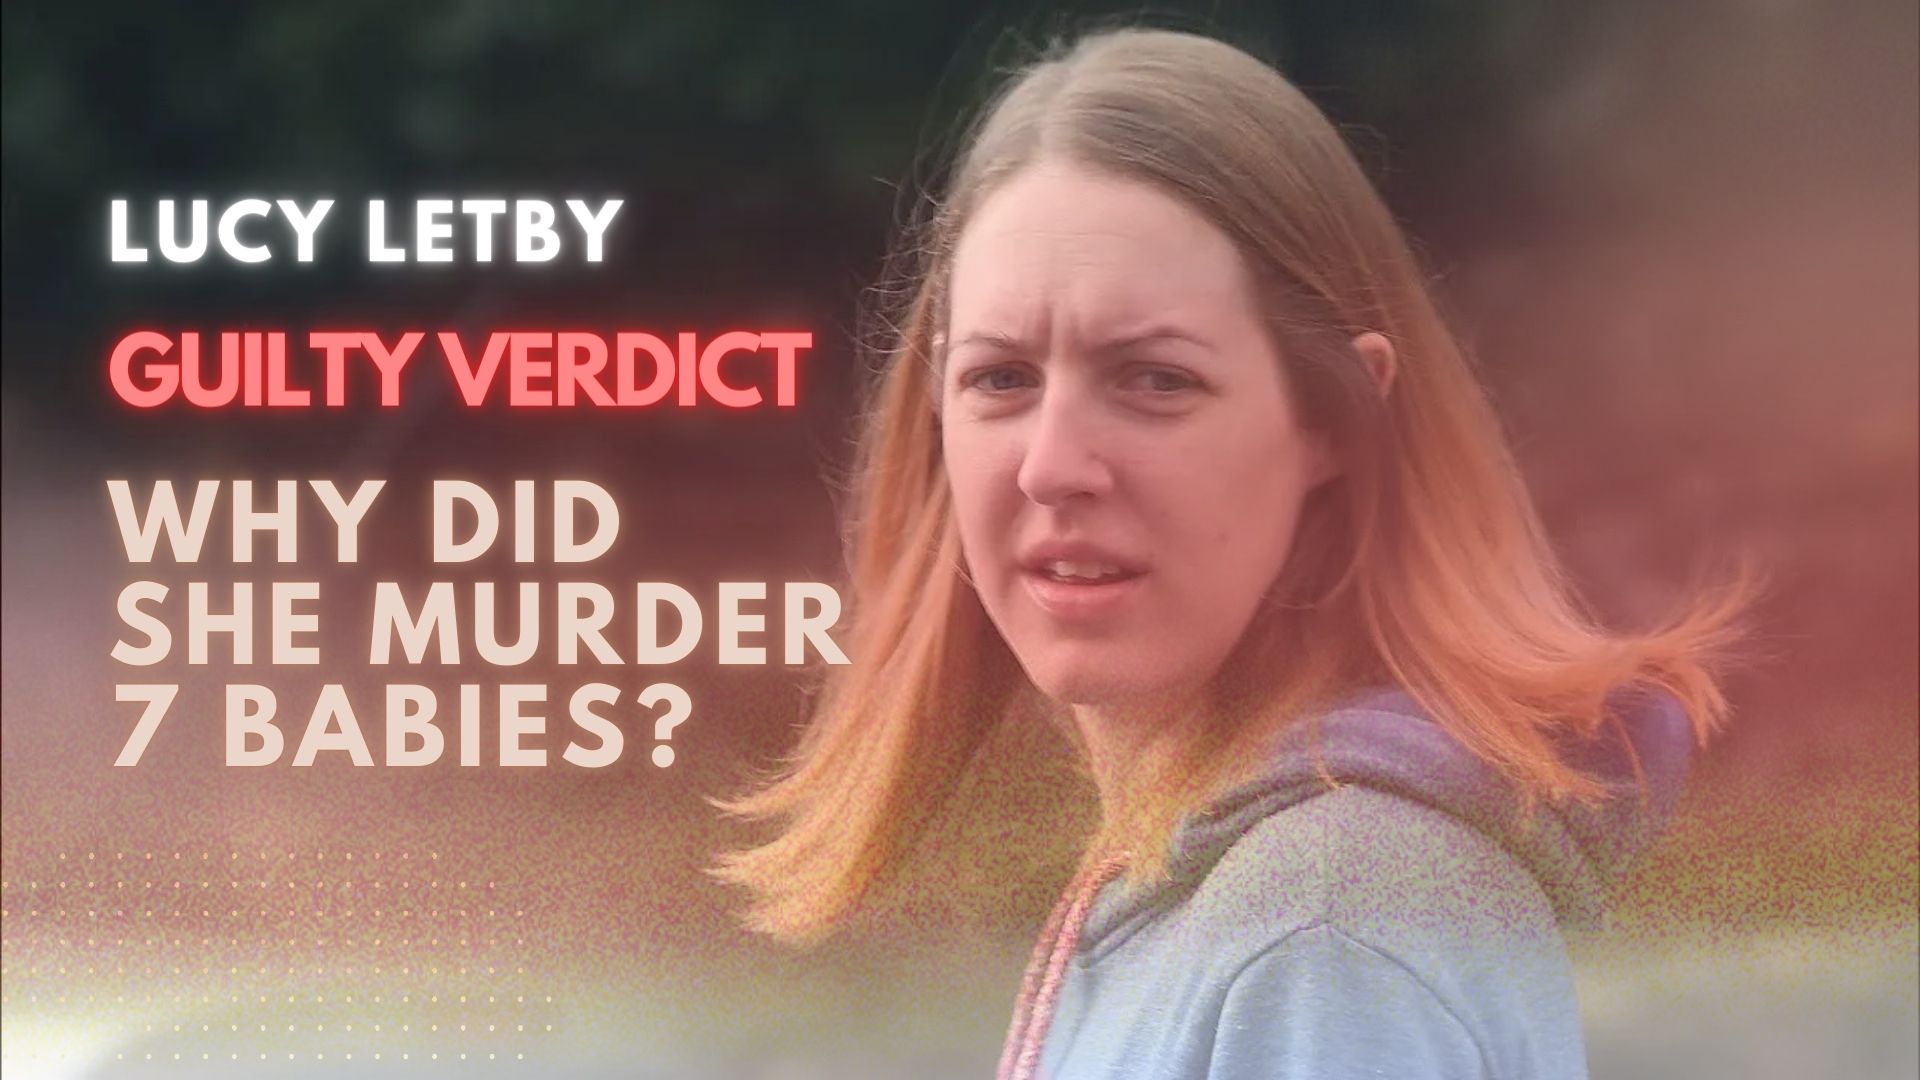 Lucy Letby Former Nurse Sentenced to Life in Prison for Murdering 7 Babies